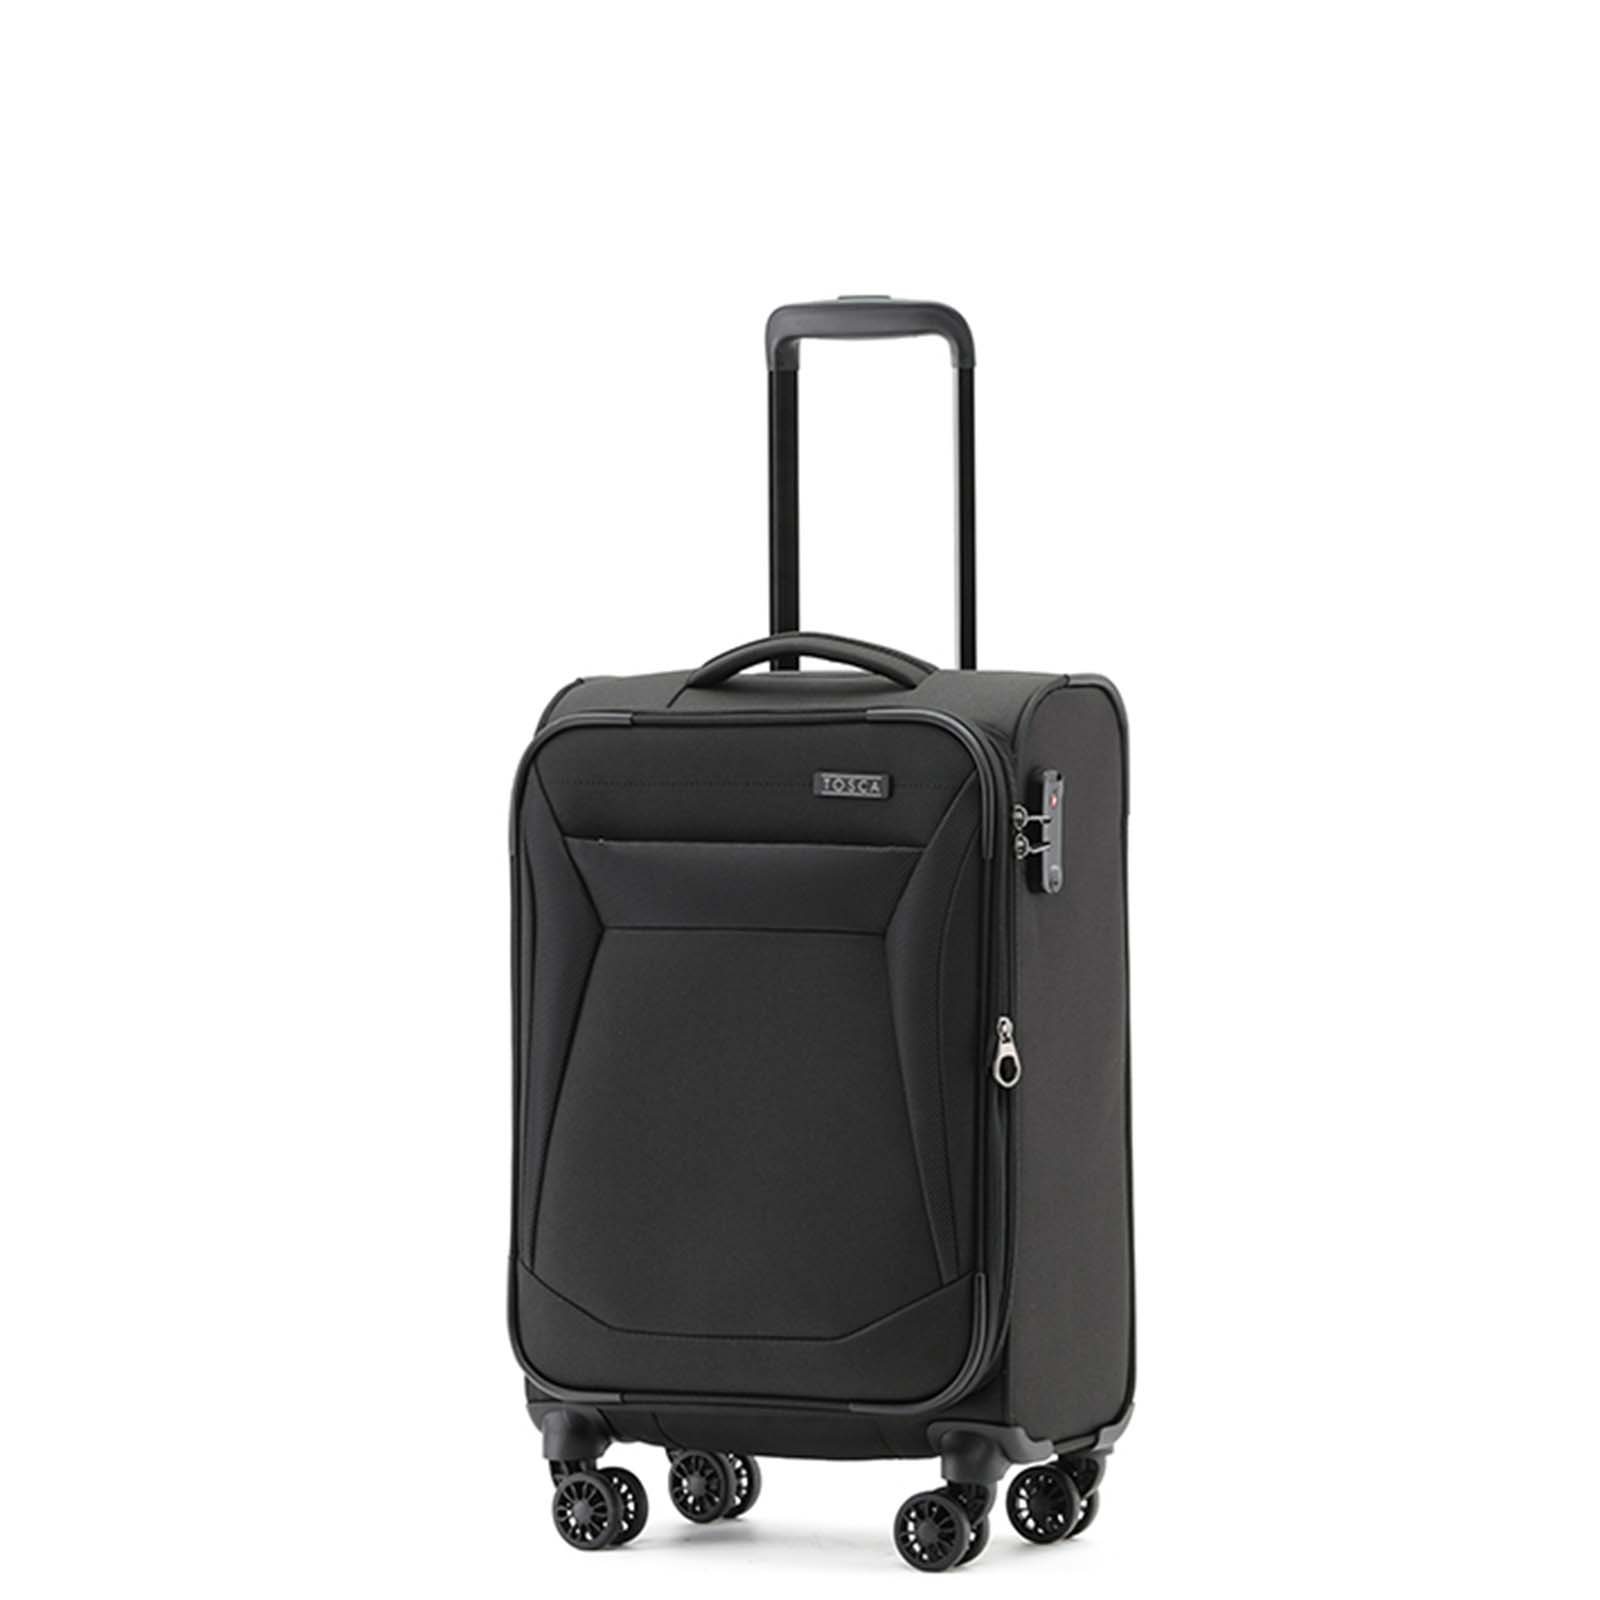 Tosca-Aviator-4-Wheel-Carry-On-Suitcase-Black-Front-Angle